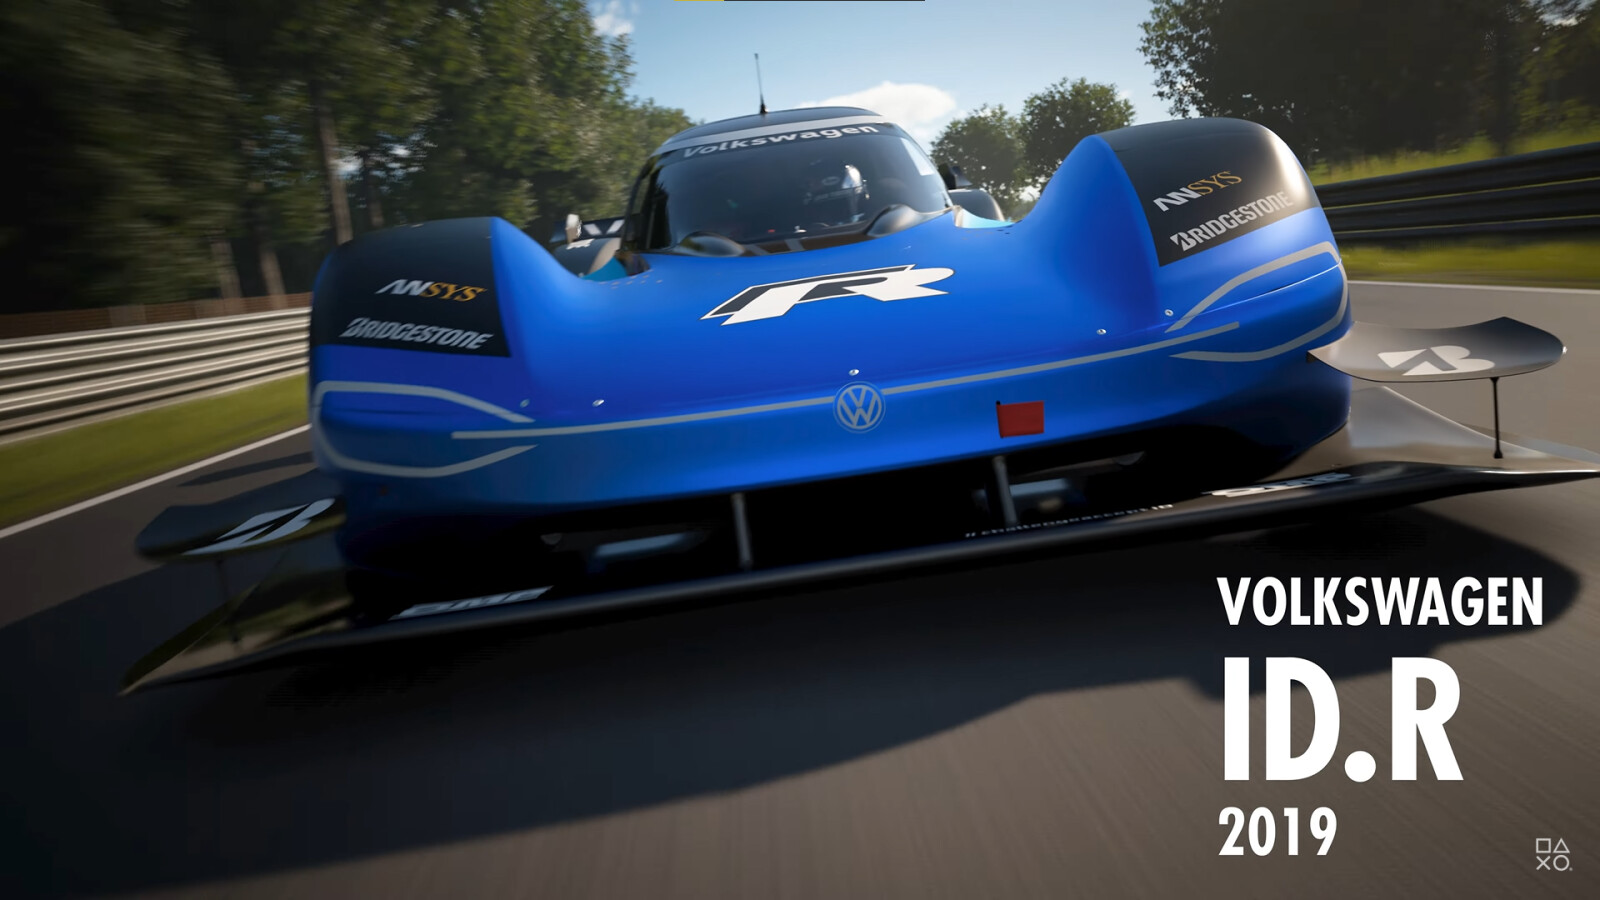 Gran Turismo 7 Update 1.23 Available Now, Here Are the Patch Notes